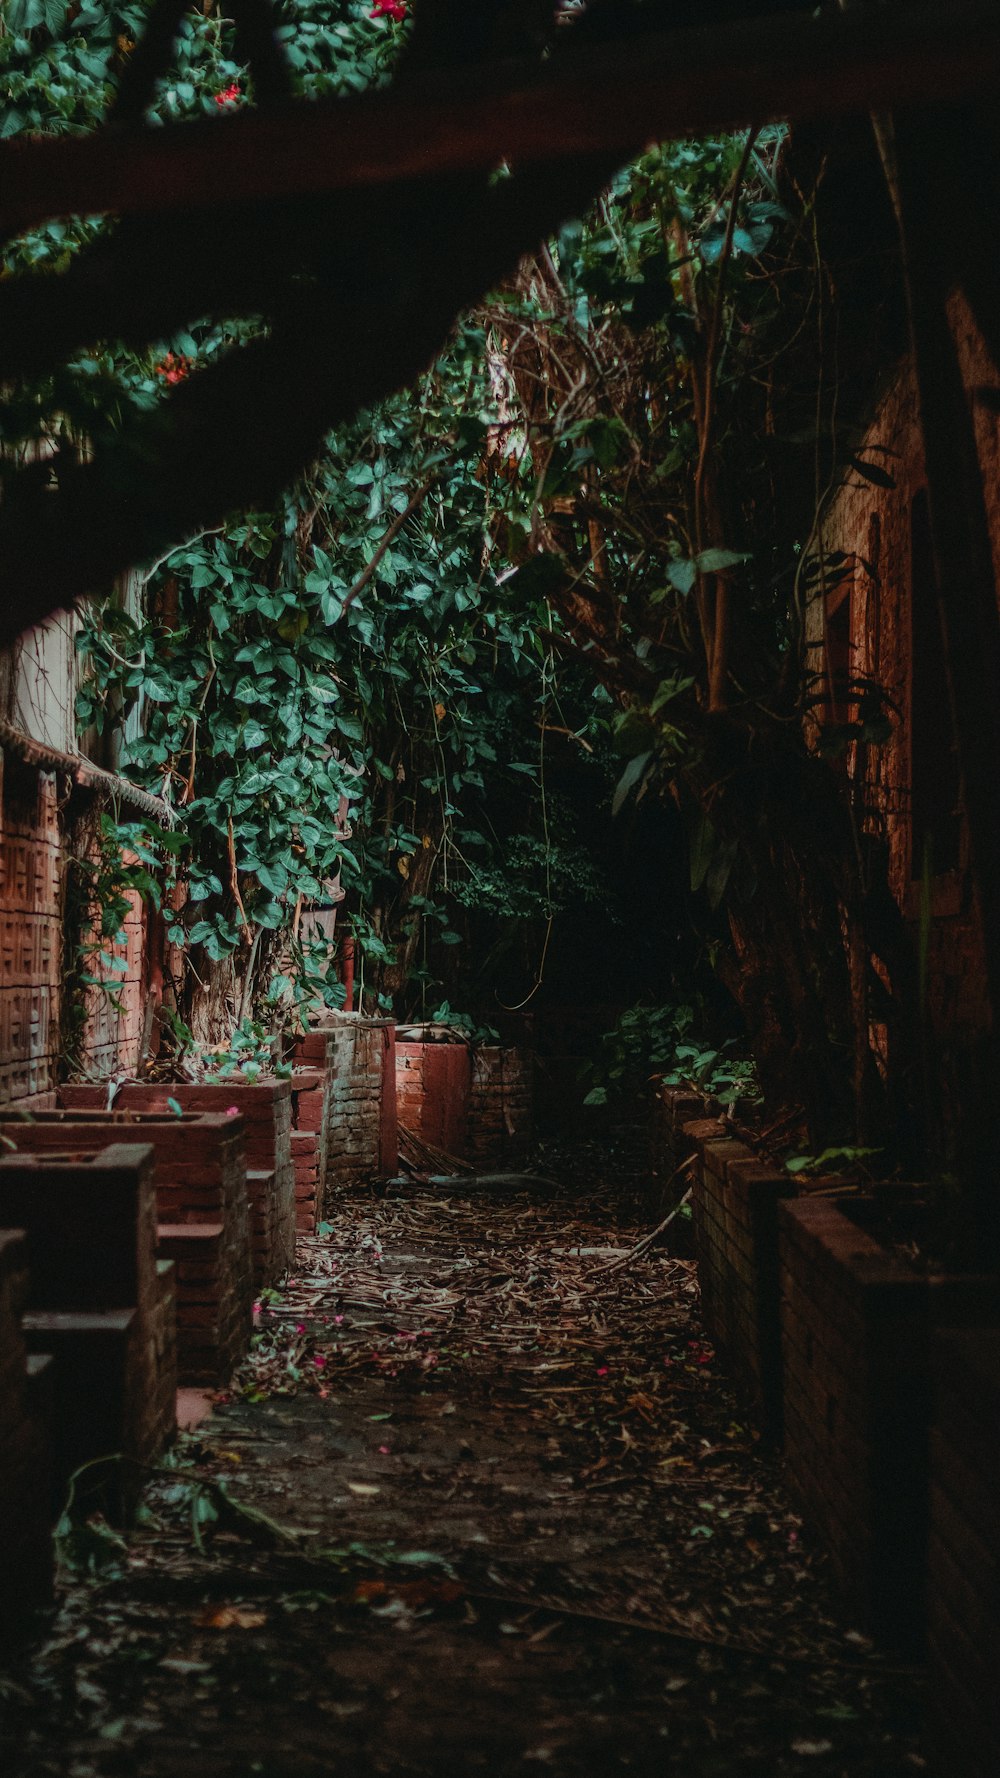 a dark alley way with lots of trees and plants